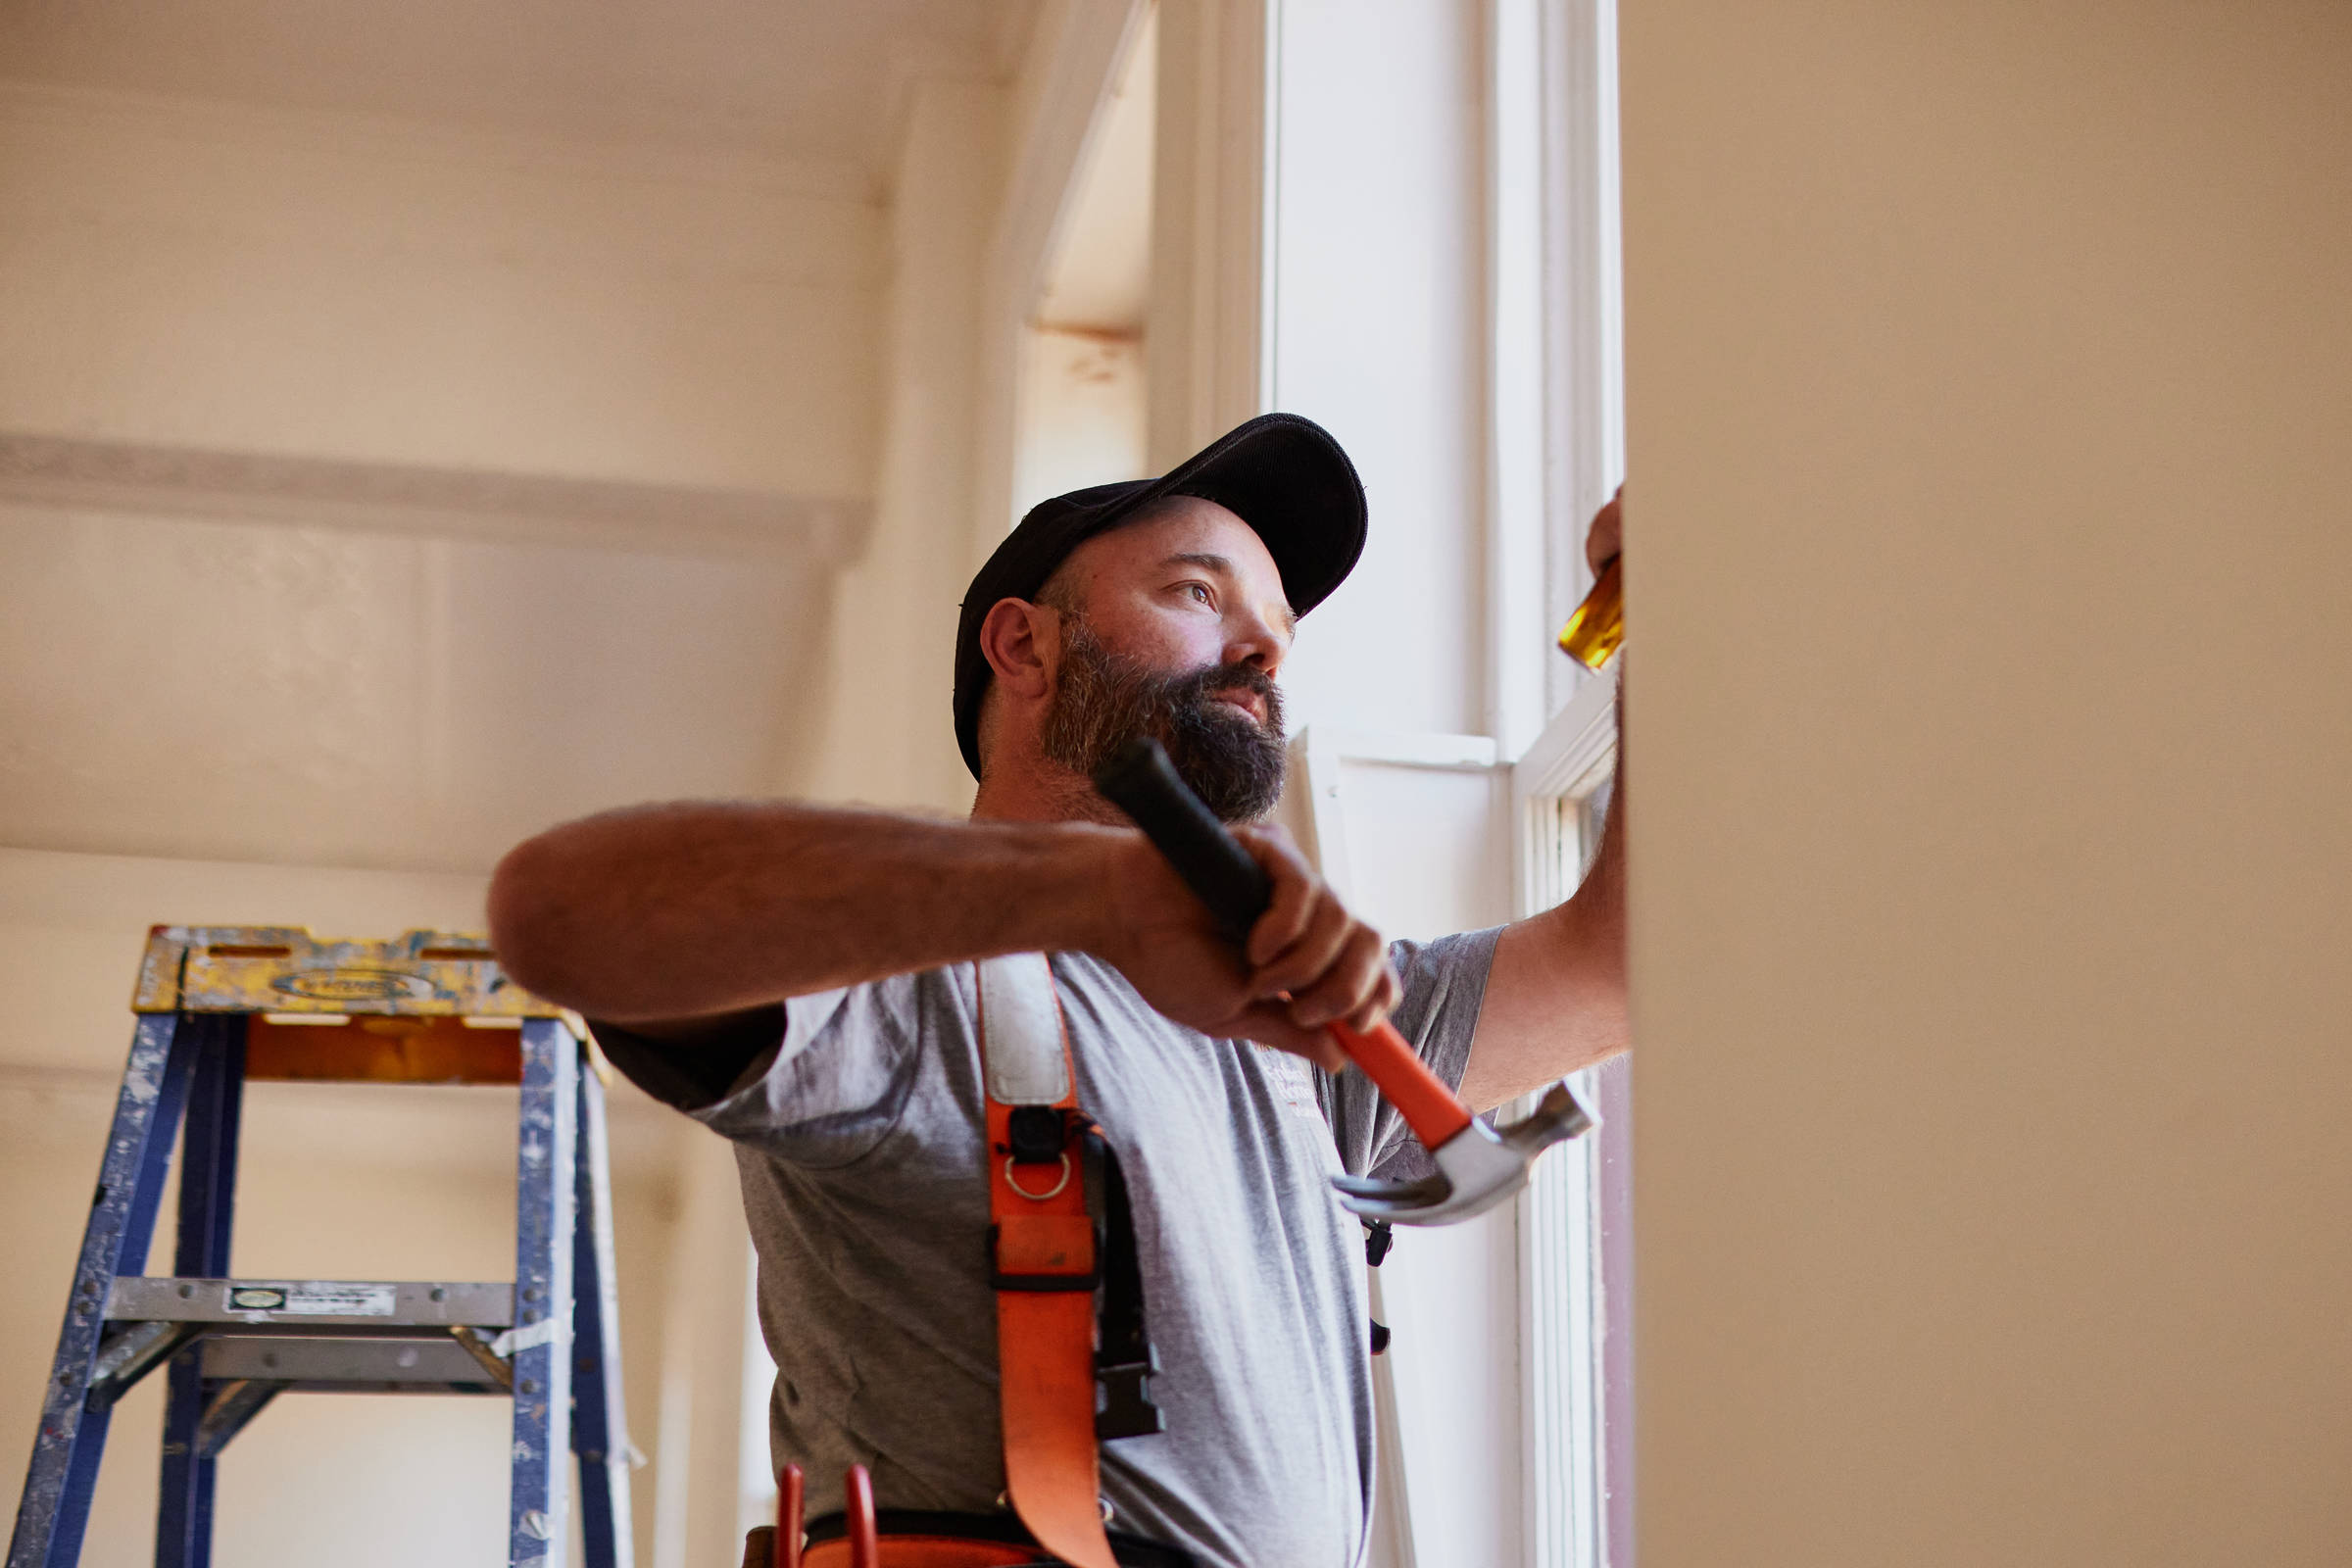 Male carpenter in his 40s who is wearing a toolbelt, looking at a sash window detail with a hammer in his hand and a blue ladder in the background. Credit: Samuel Shelley.